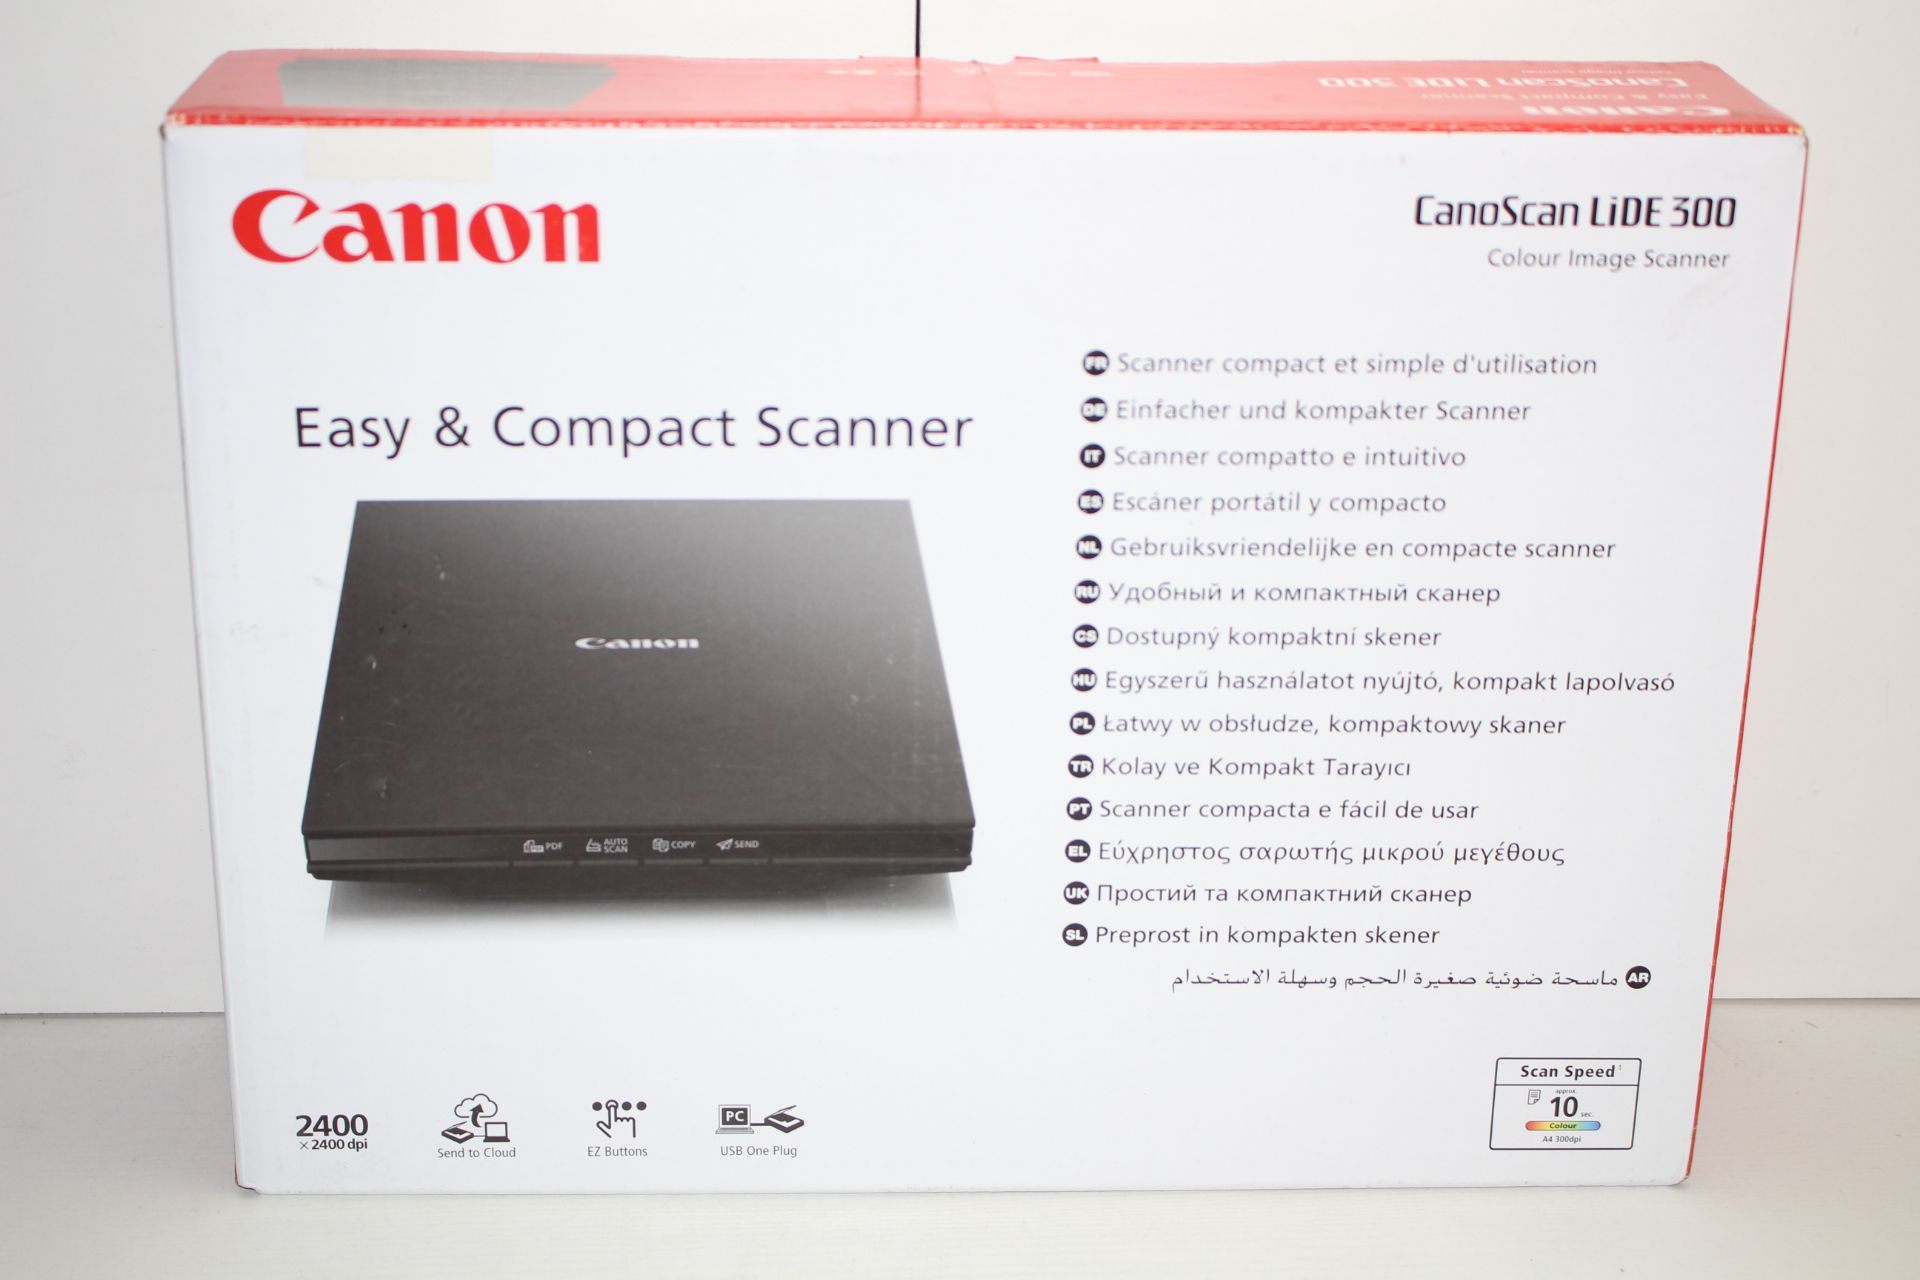 BOXED CANON CANOSCAN LIDE 300 COMPACT SCANNER RRP £52.49Condition ReportAppraisal Available on